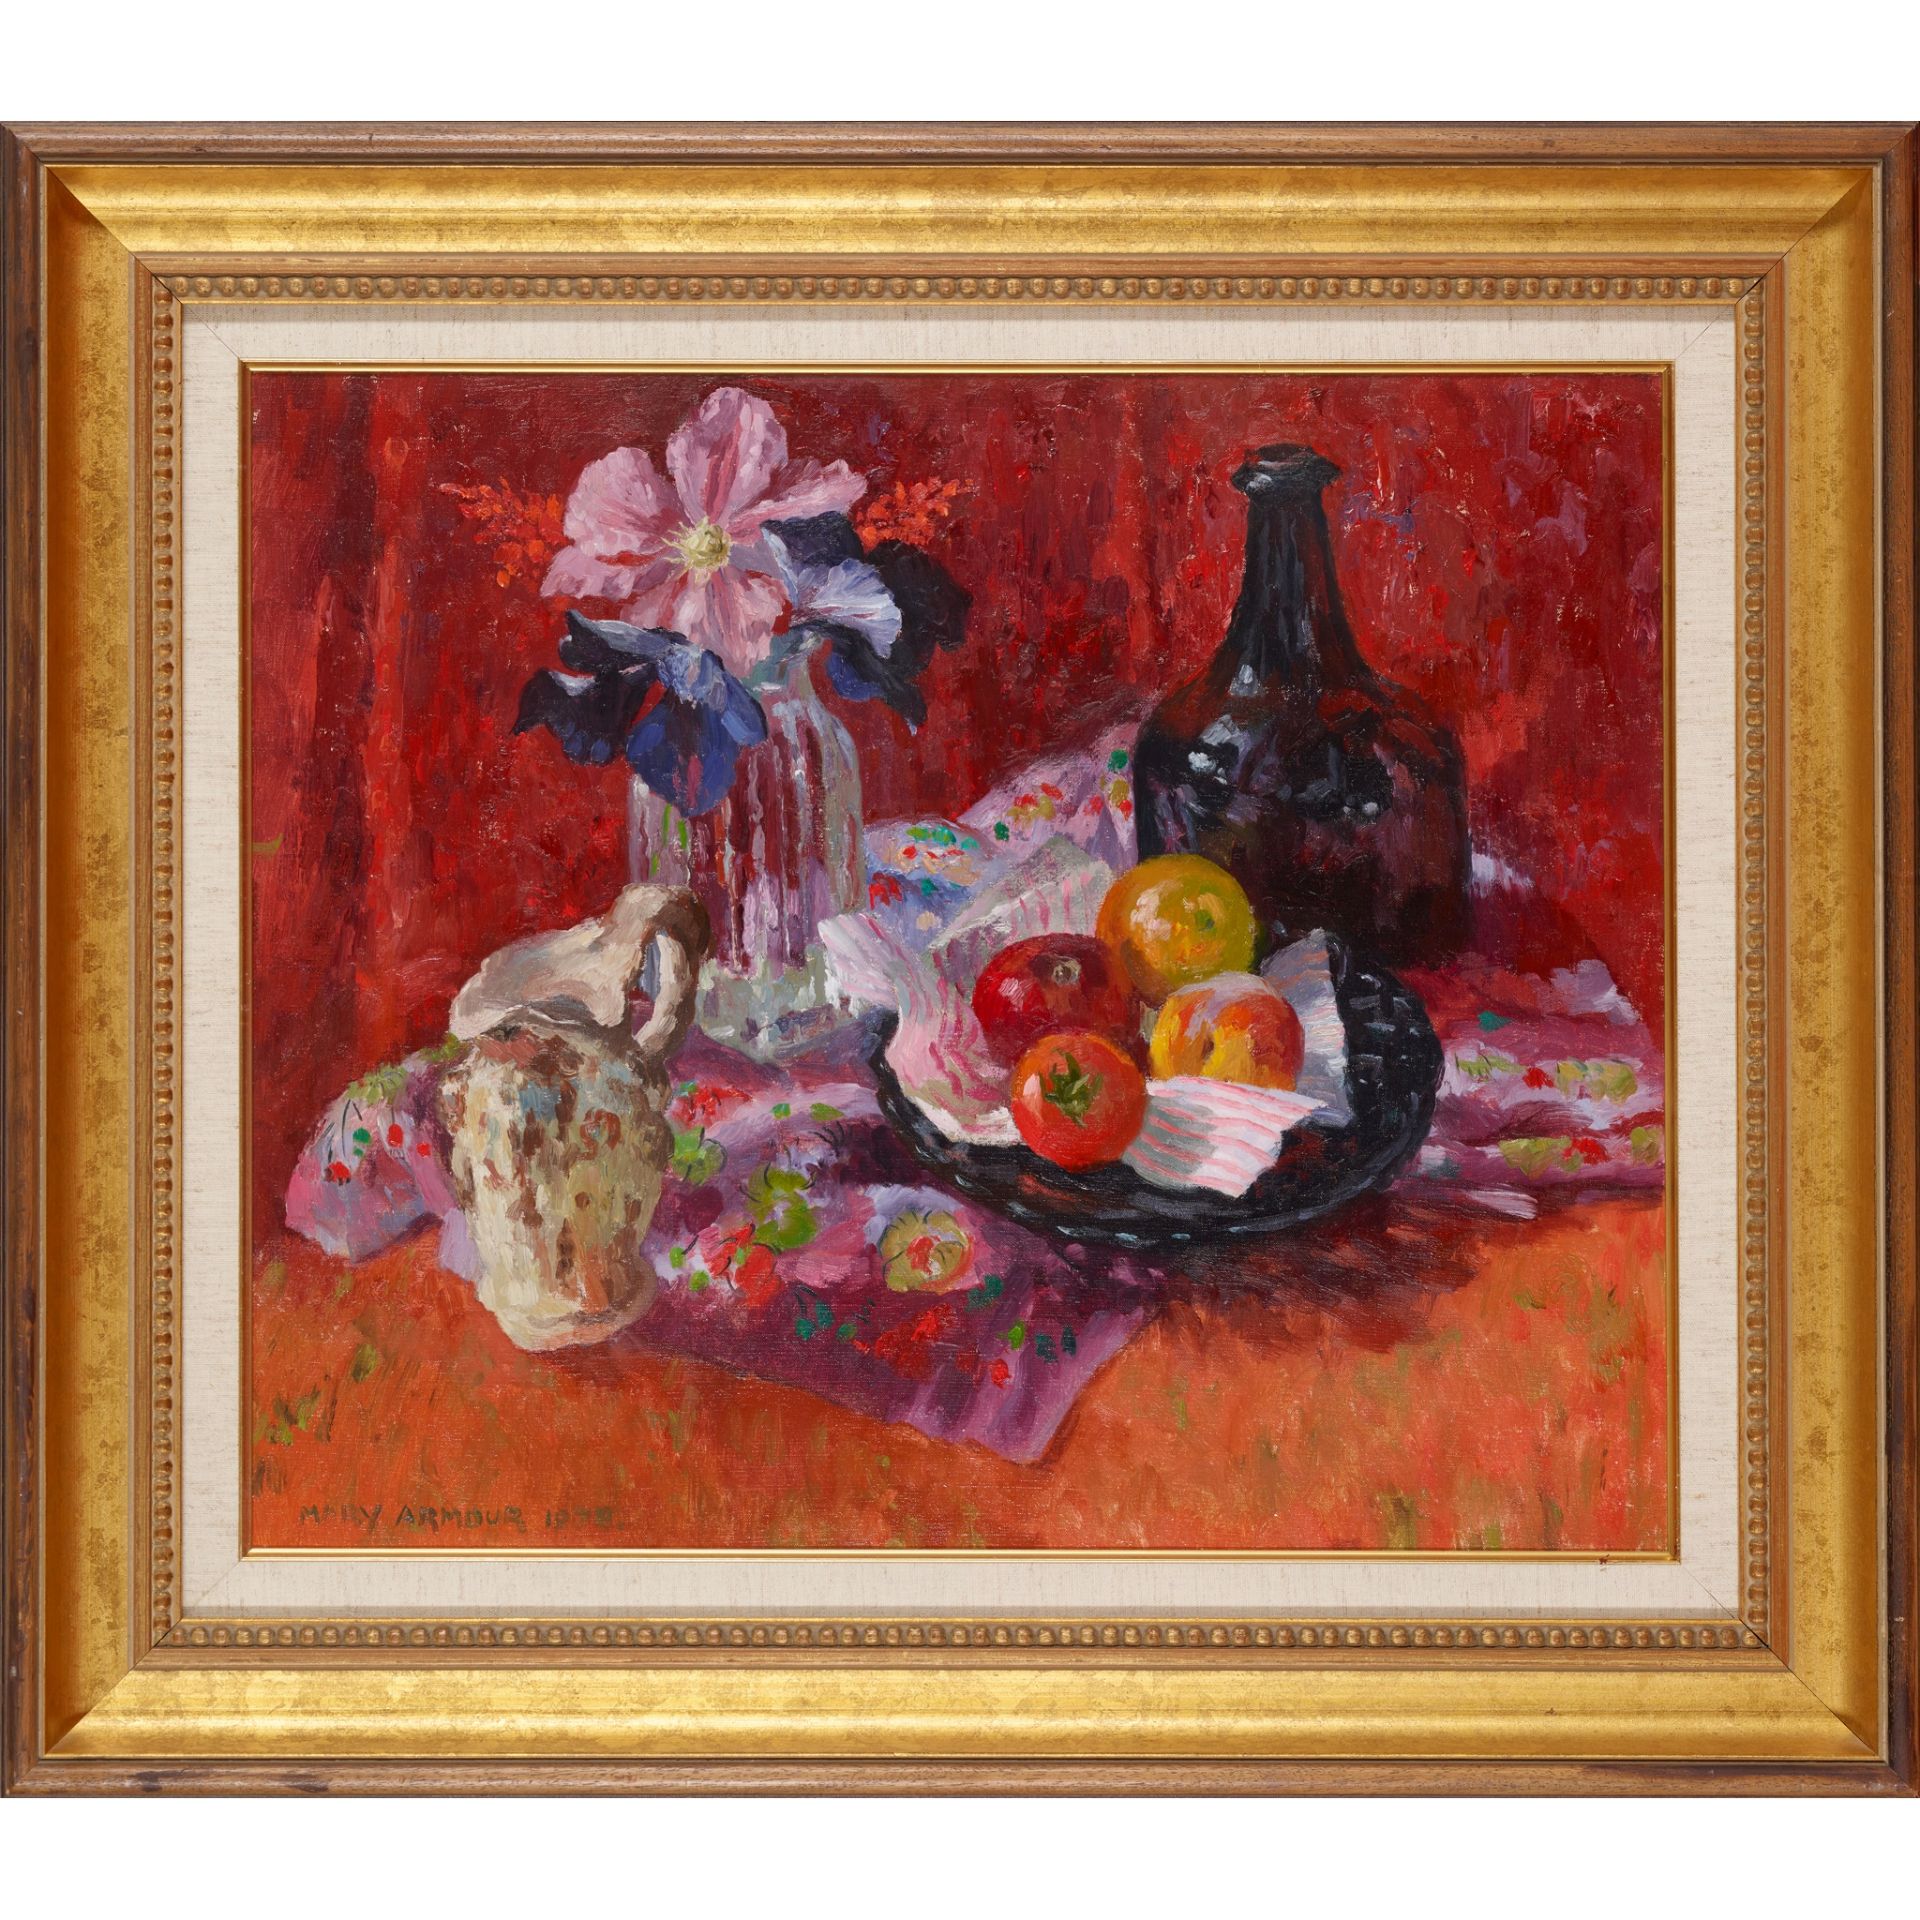 § MARY NICOL NEILL ARMOUR R.S.A., R.S.W. (SCOTTISH 1902-2000) STILL LIFE WITH PURPLE CLEMATIS - Image 2 of 3